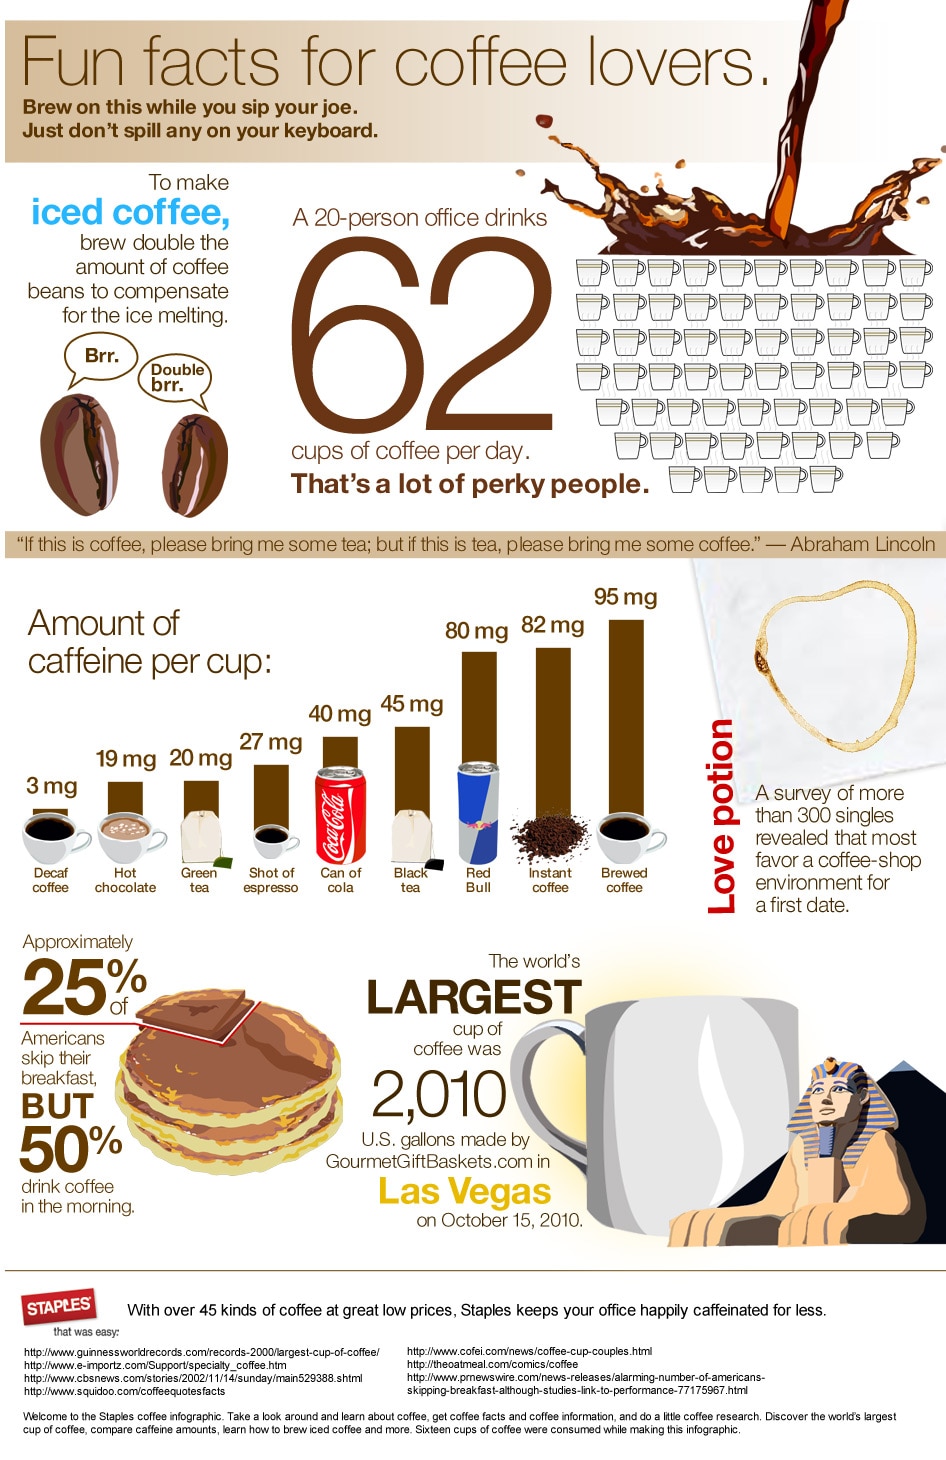 b"Fun Facts About Coffee  ONeill Coffee"